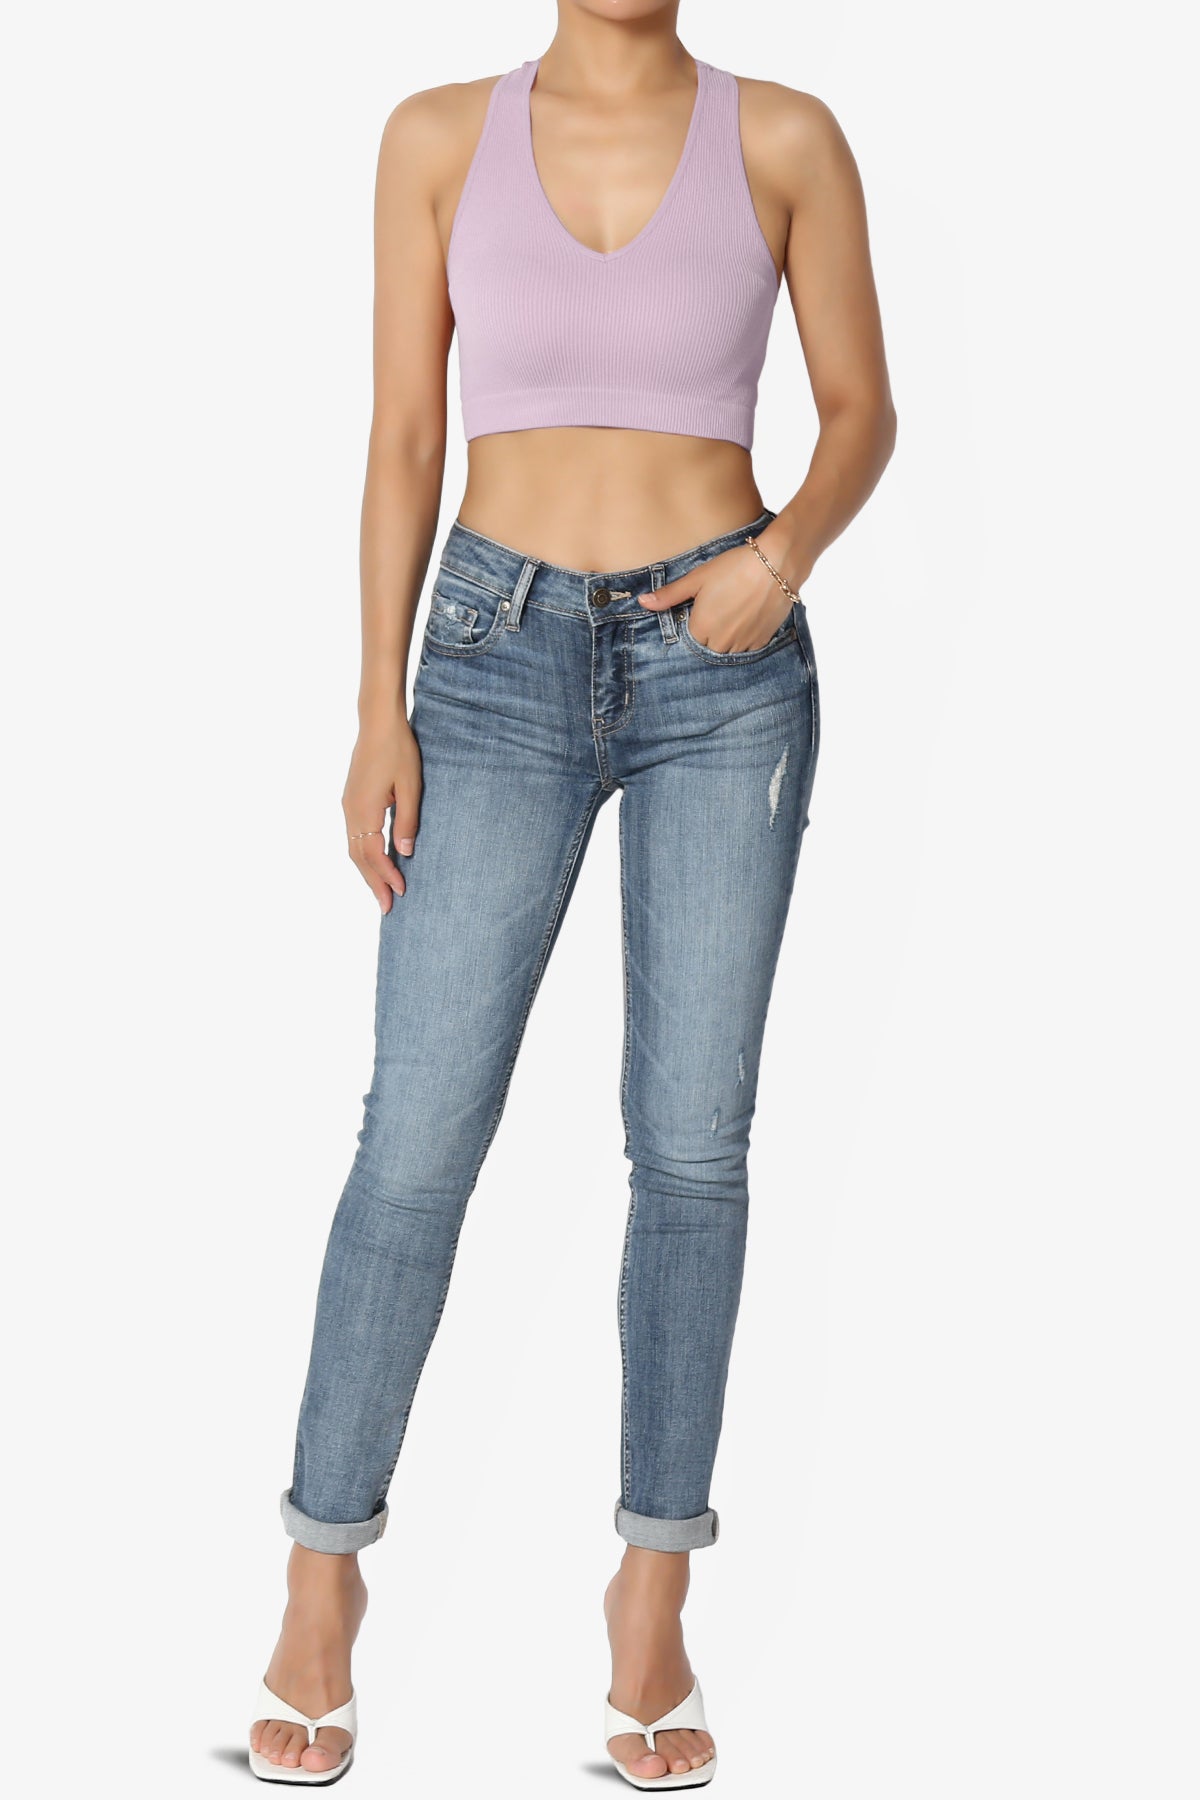 Load image into Gallery viewer, Daliyah Ribbed Seamless Halter Bra Top DUSTY LAVENDER_6
